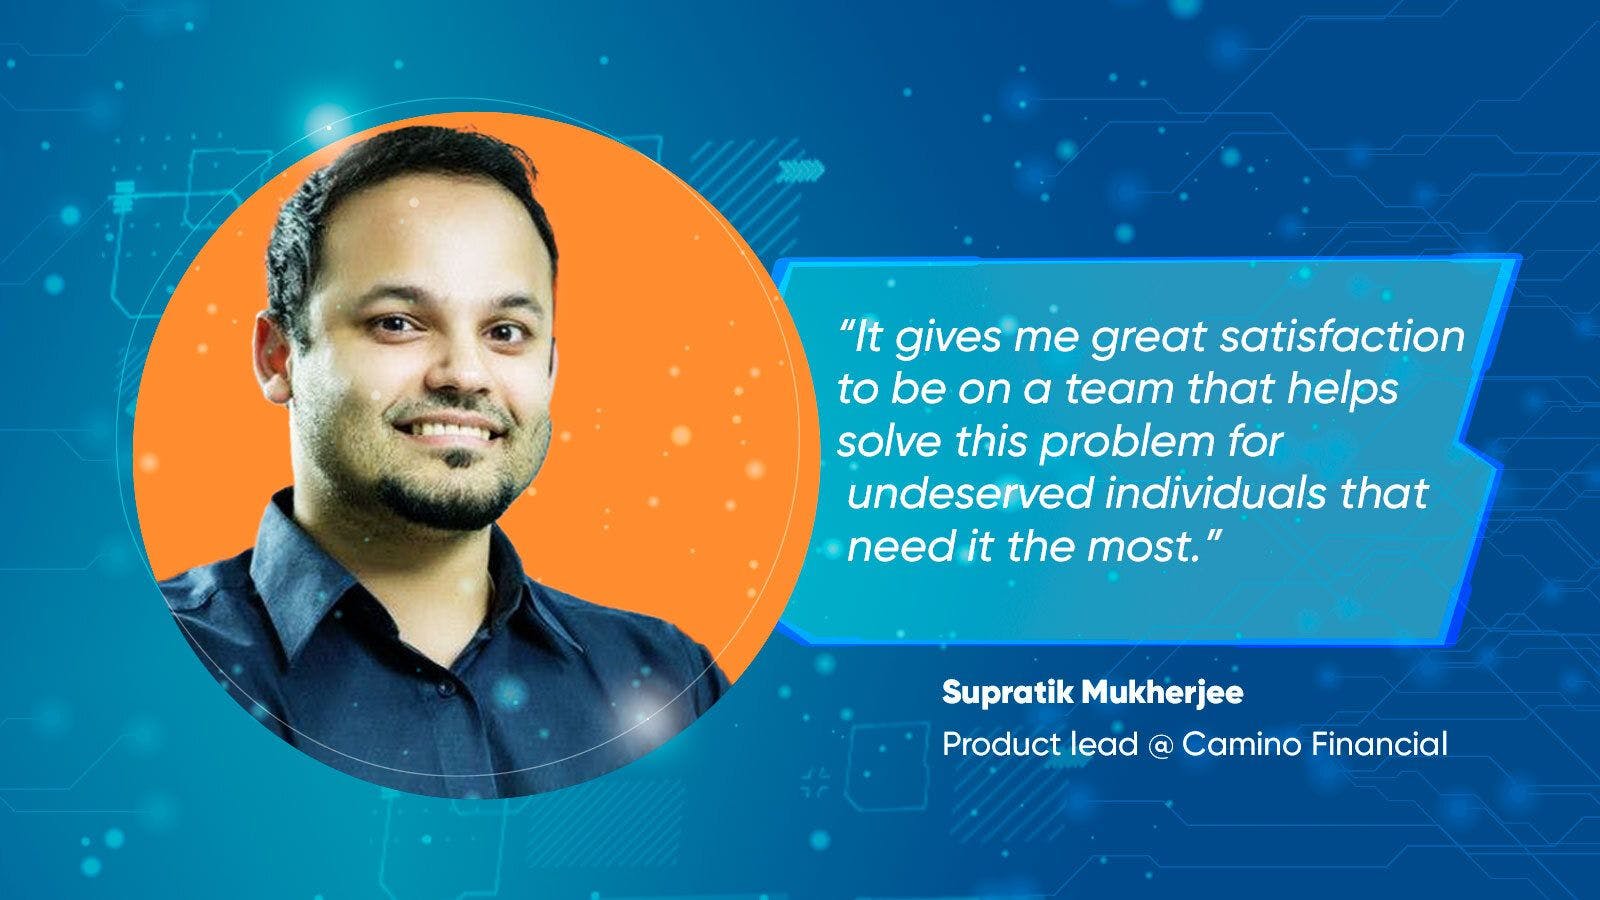 /solving-access-to-finance-for-underserved-communities-interview-with-supratik-mukherjee feature image